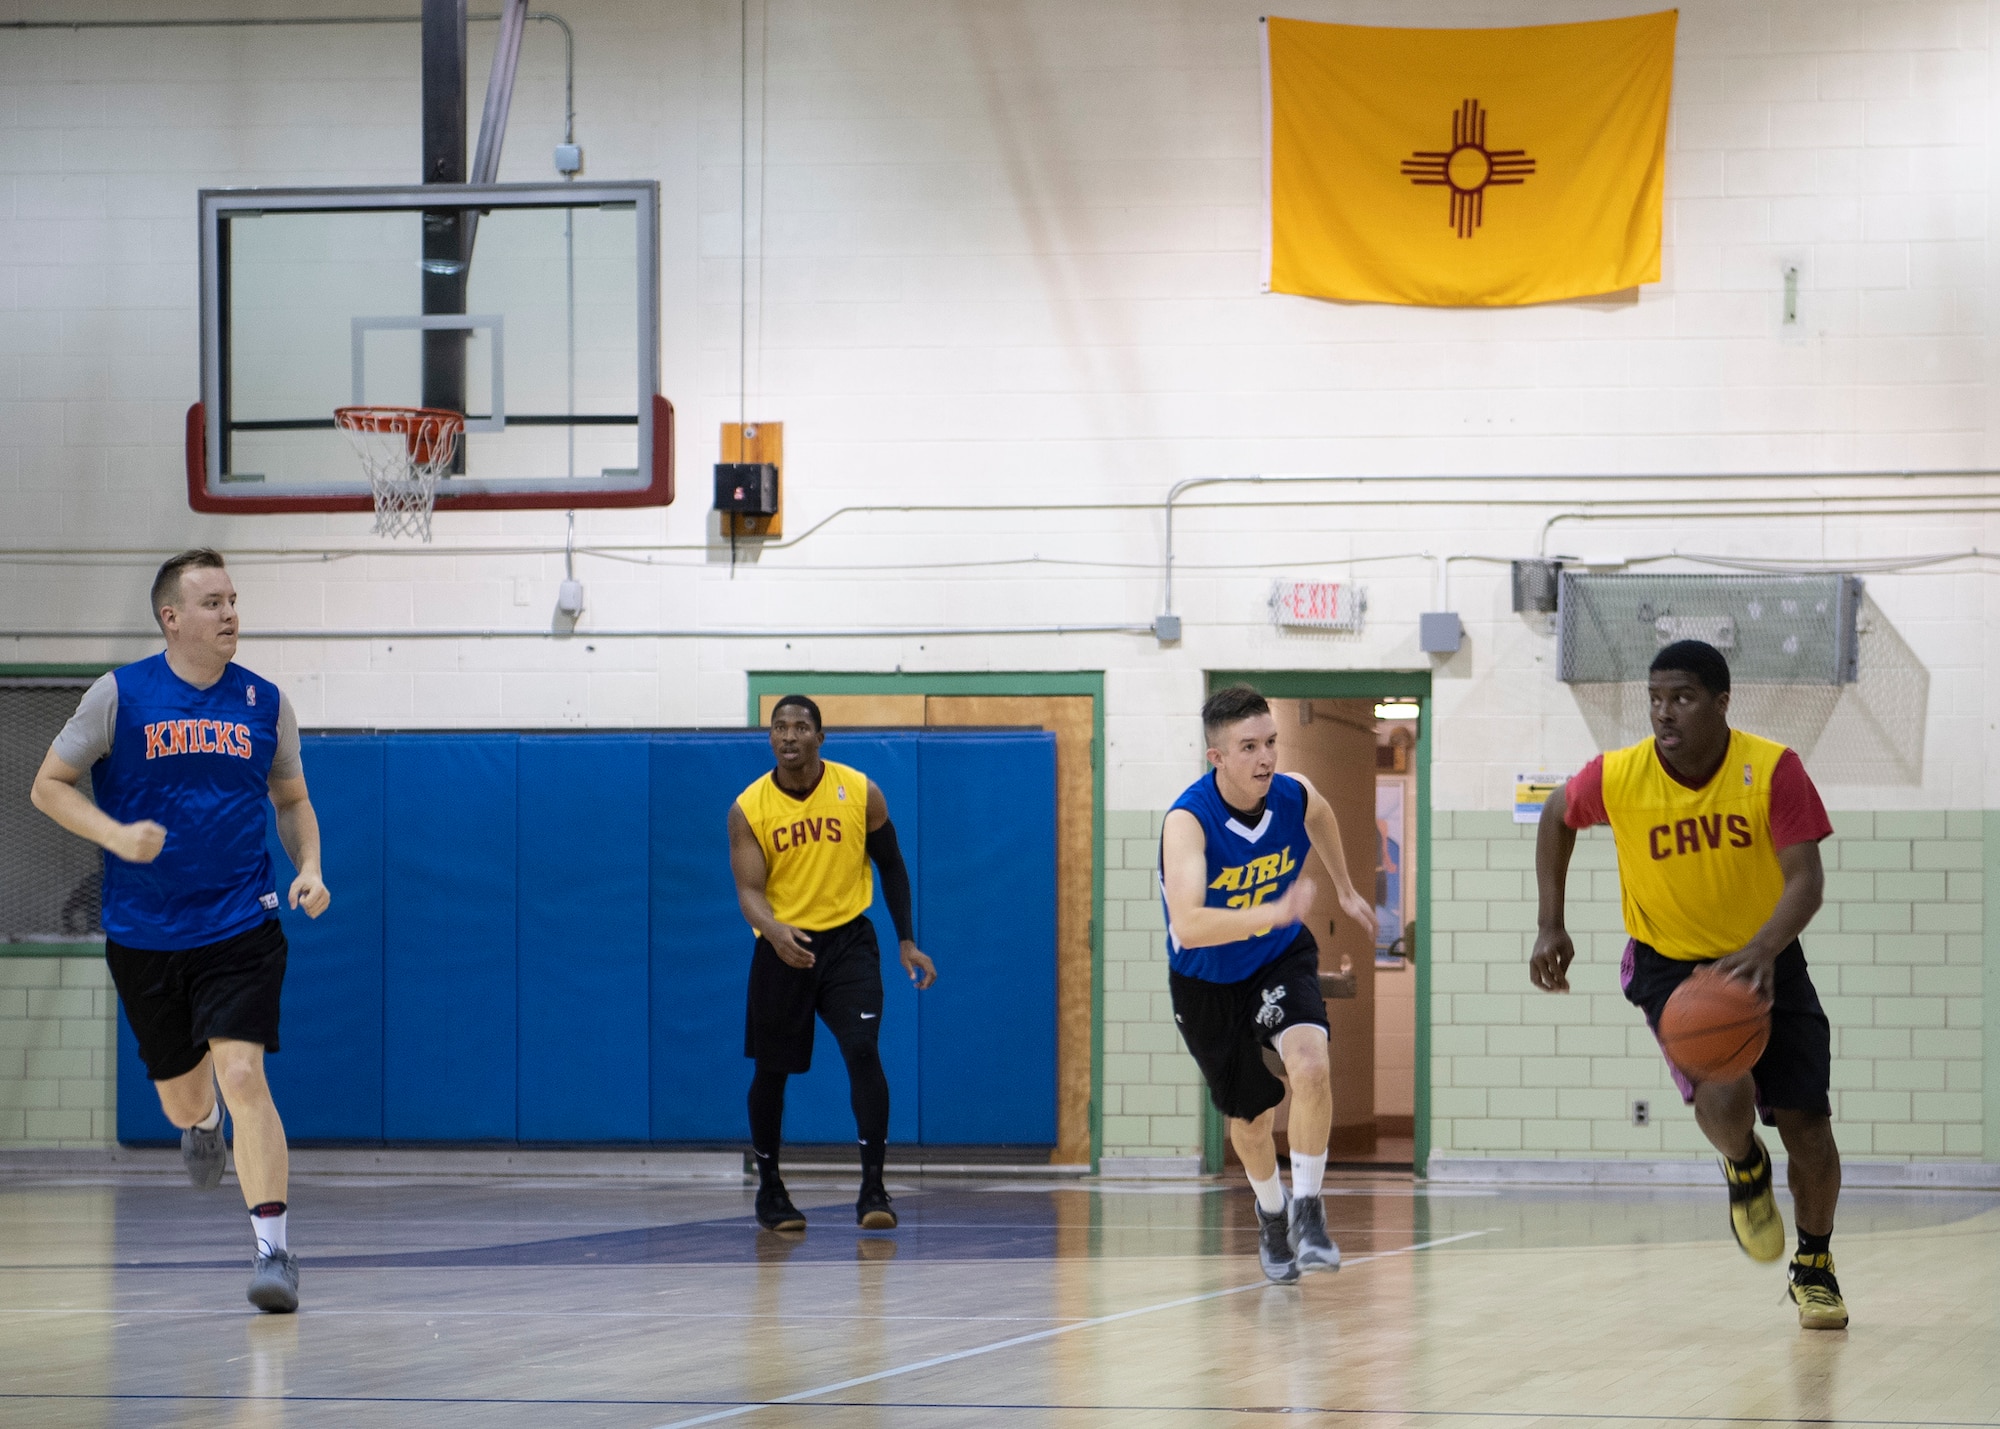 WSSS-Lopez guard Airman 1st Class Yaukis Cole performs a lay-up against AFRL defenders in an intramural basketball contest at Kirtland Air Force Base, N.M., Jan. 17, 2019. Despite a seven-point performance by Cole, WSSS-Lopez were defeated by AFRL, 41-47. (U.S. Air Force photo by Staff Sgt. J.D. Strong II)